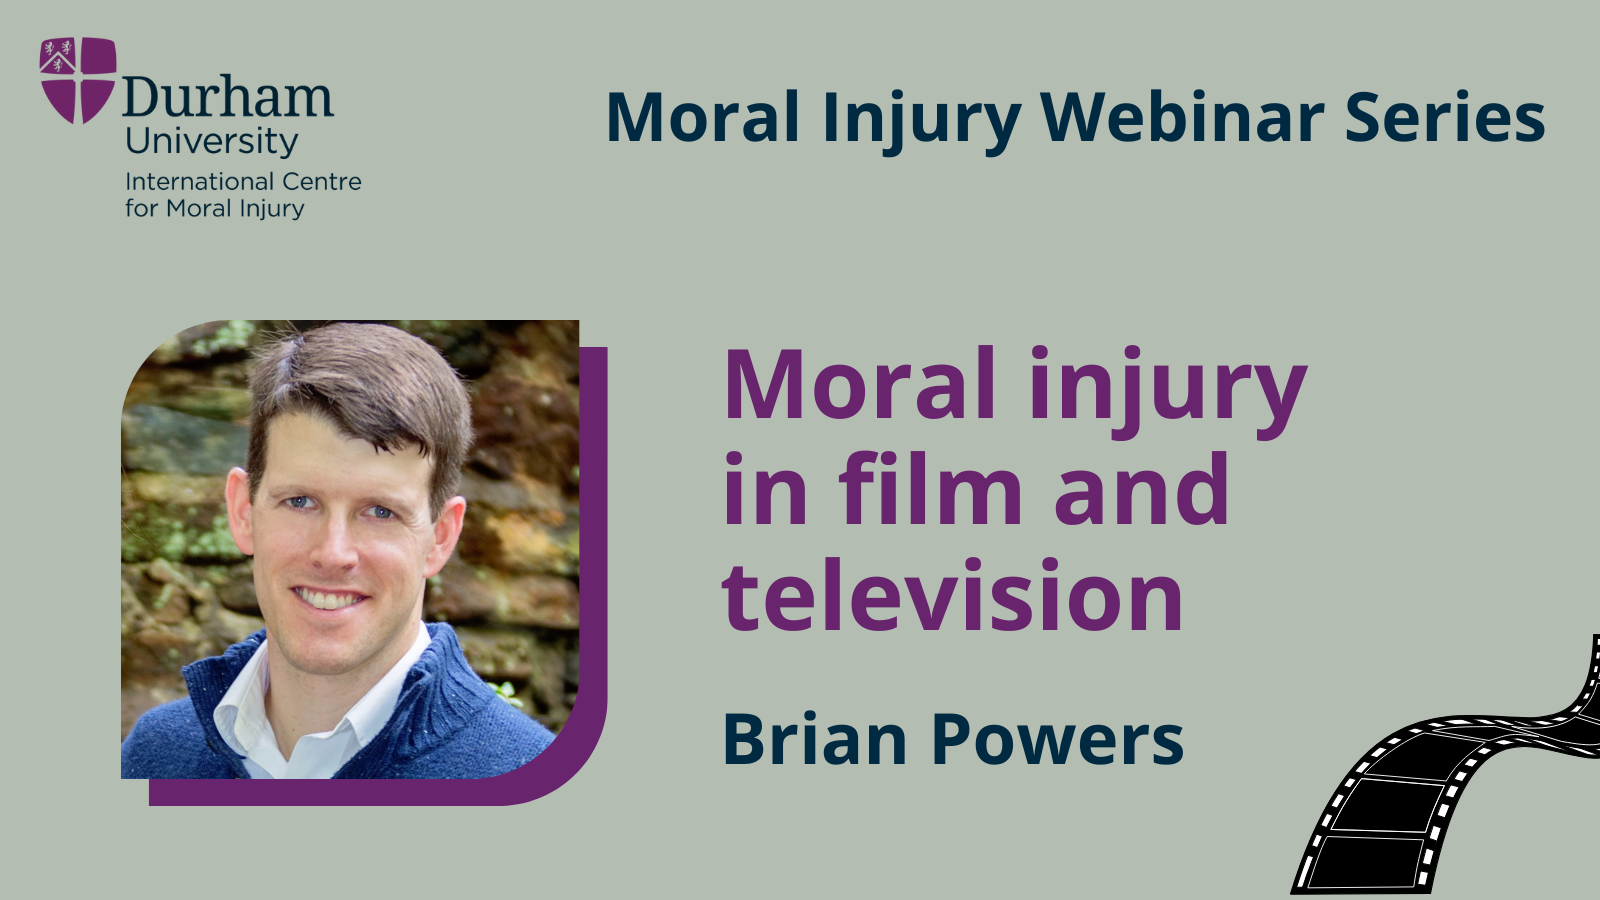 Video of webinar on moral injury in film and television